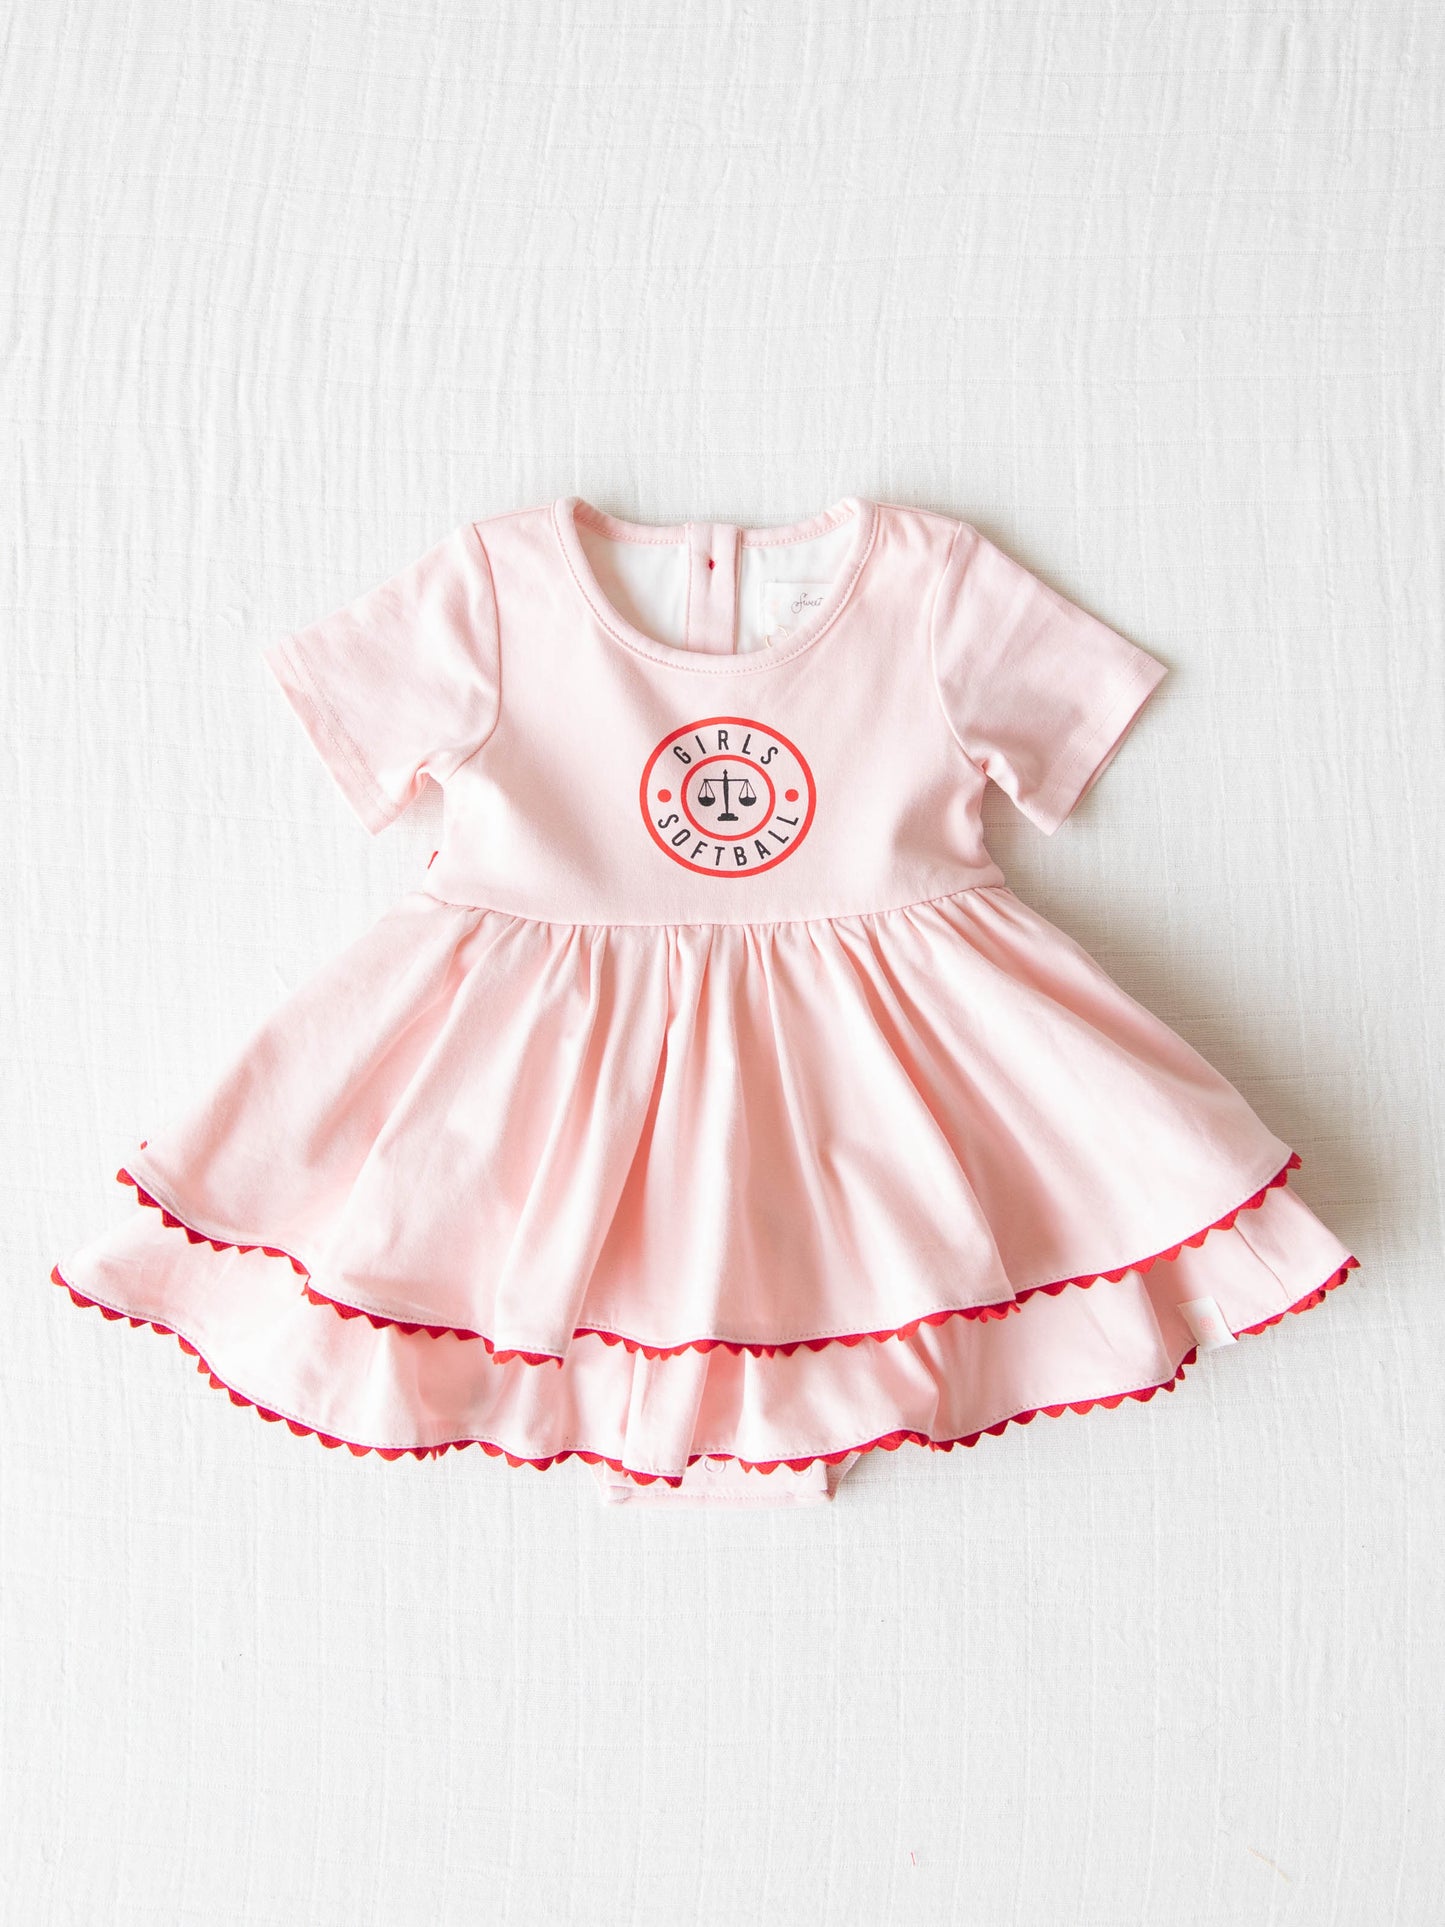 Belle Bubble - Girls Softball. This pink double skirted dress has the same Girls Softball logo on the front as our Girl’s Softball Dress & Hat.